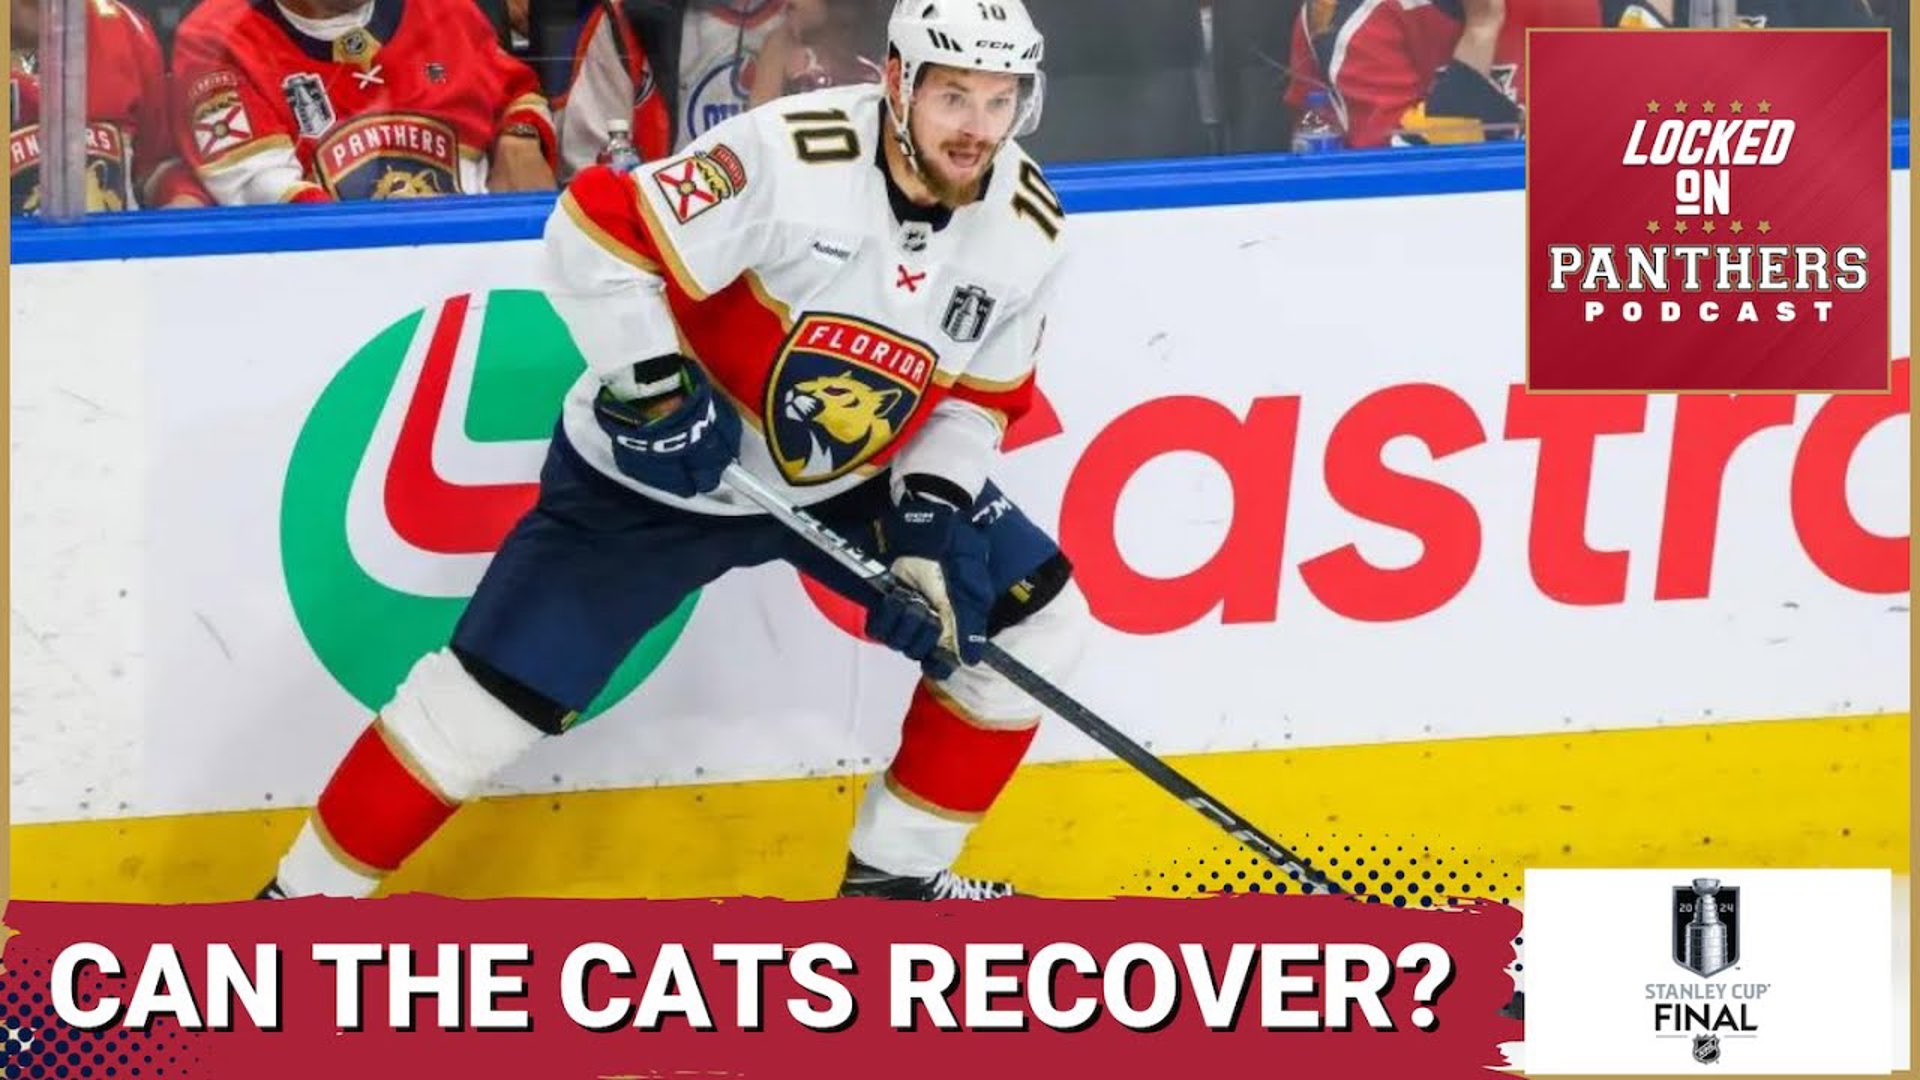 The Panthers have now lost three straight after going up 3-0 in the Stanley Cup Final. How do the Panthers recover?